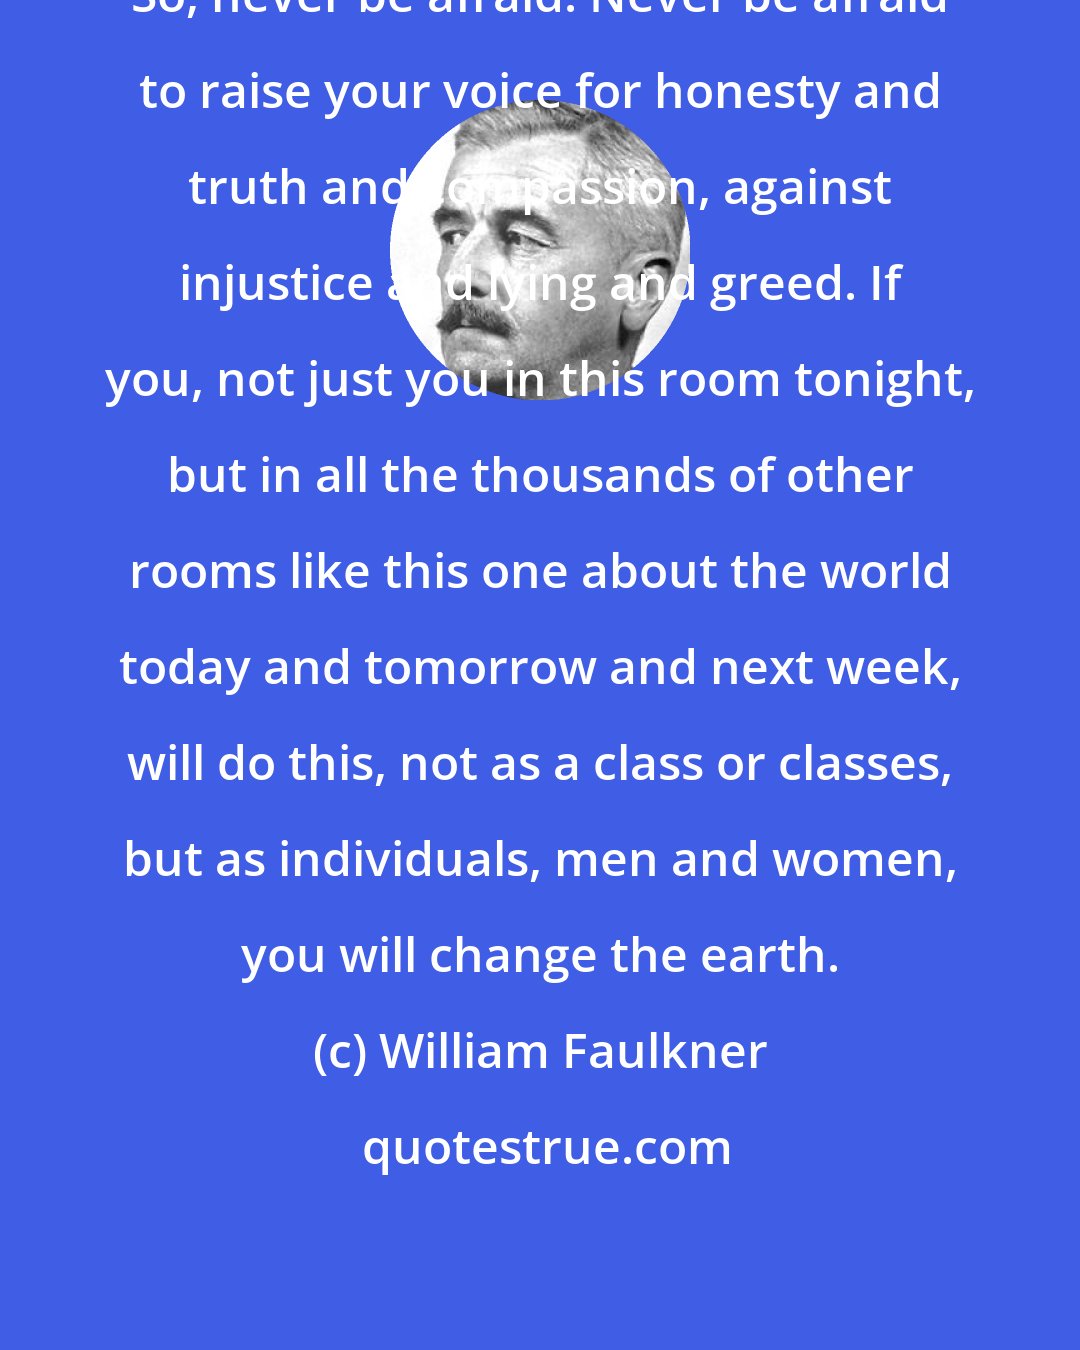 William Faulkner: So, never be afraid. Never be afraid to raise your voice for honesty and truth and compassion, against injustice and lying and greed. If you, not just you in this room tonight, but in all the thousands of other rooms like this one about the world today and tomorrow and next week, will do this, not as a class or classes, but as individuals, men and women, you will change the earth.